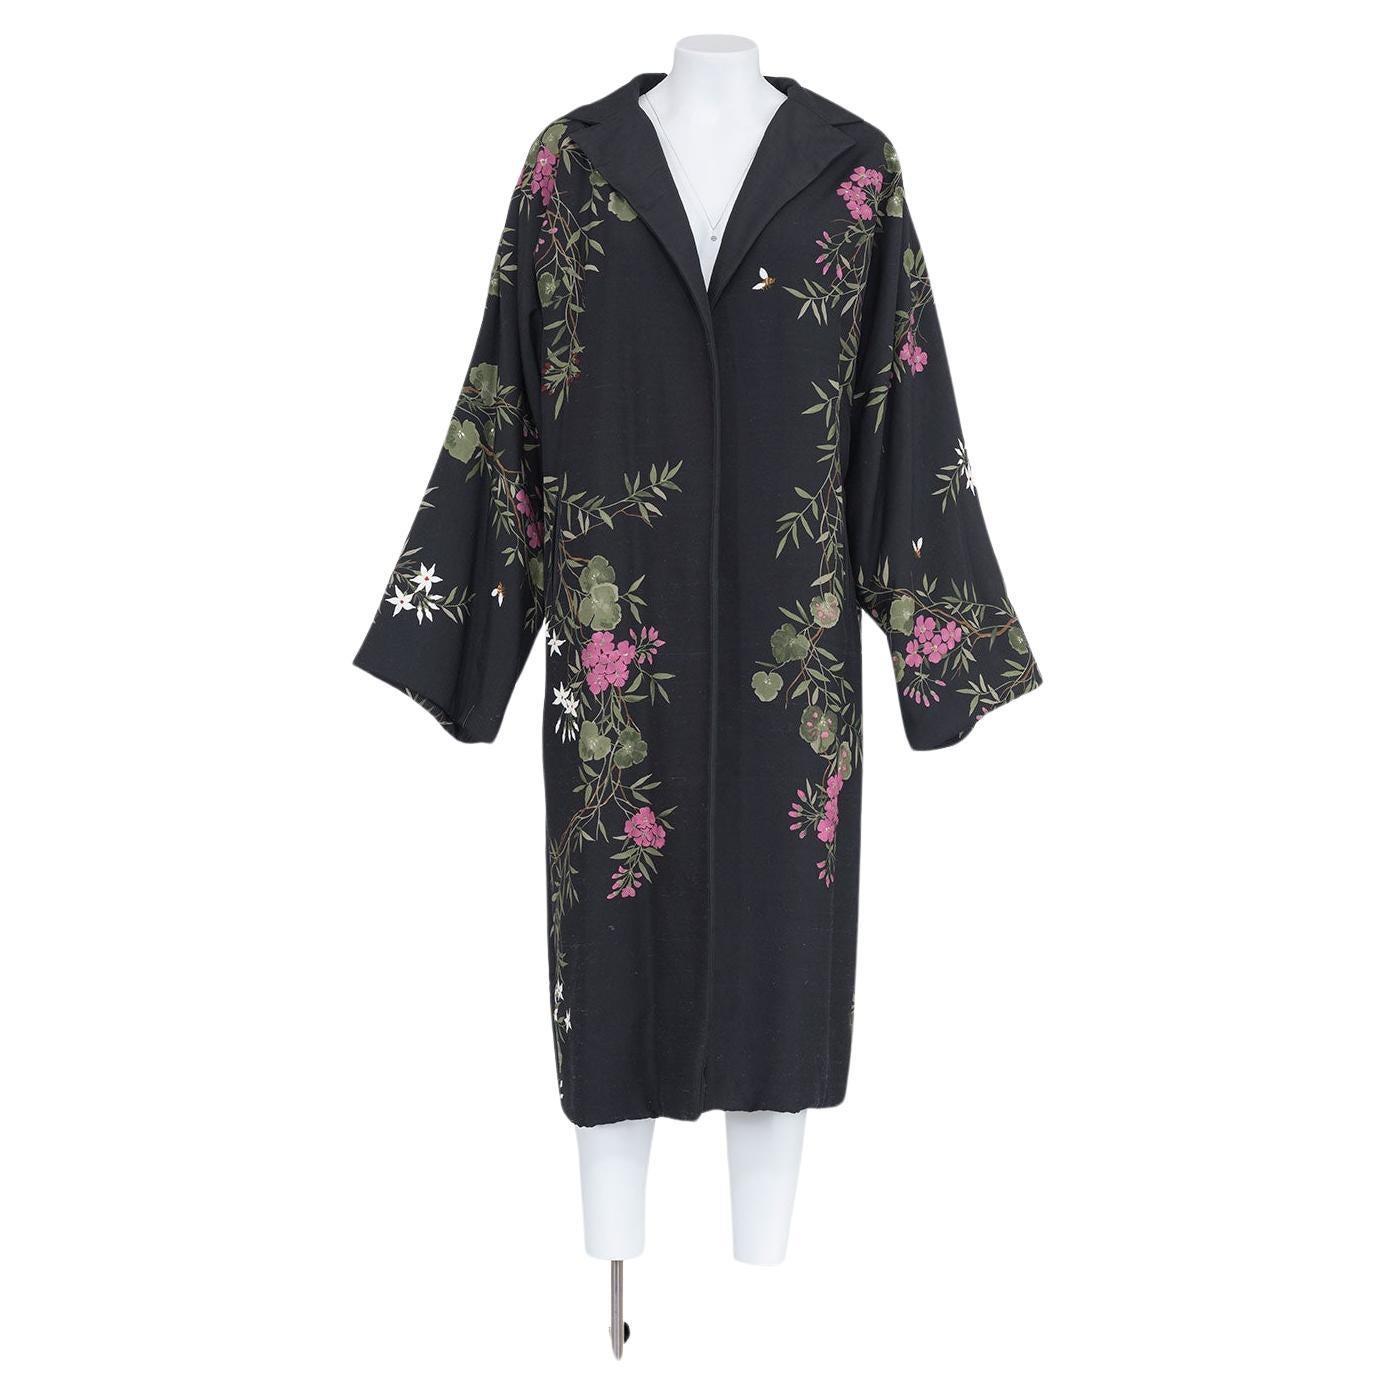 DOLCE & GABBANA FW 98 Rare Floral Painted Shantung Coat For Sale